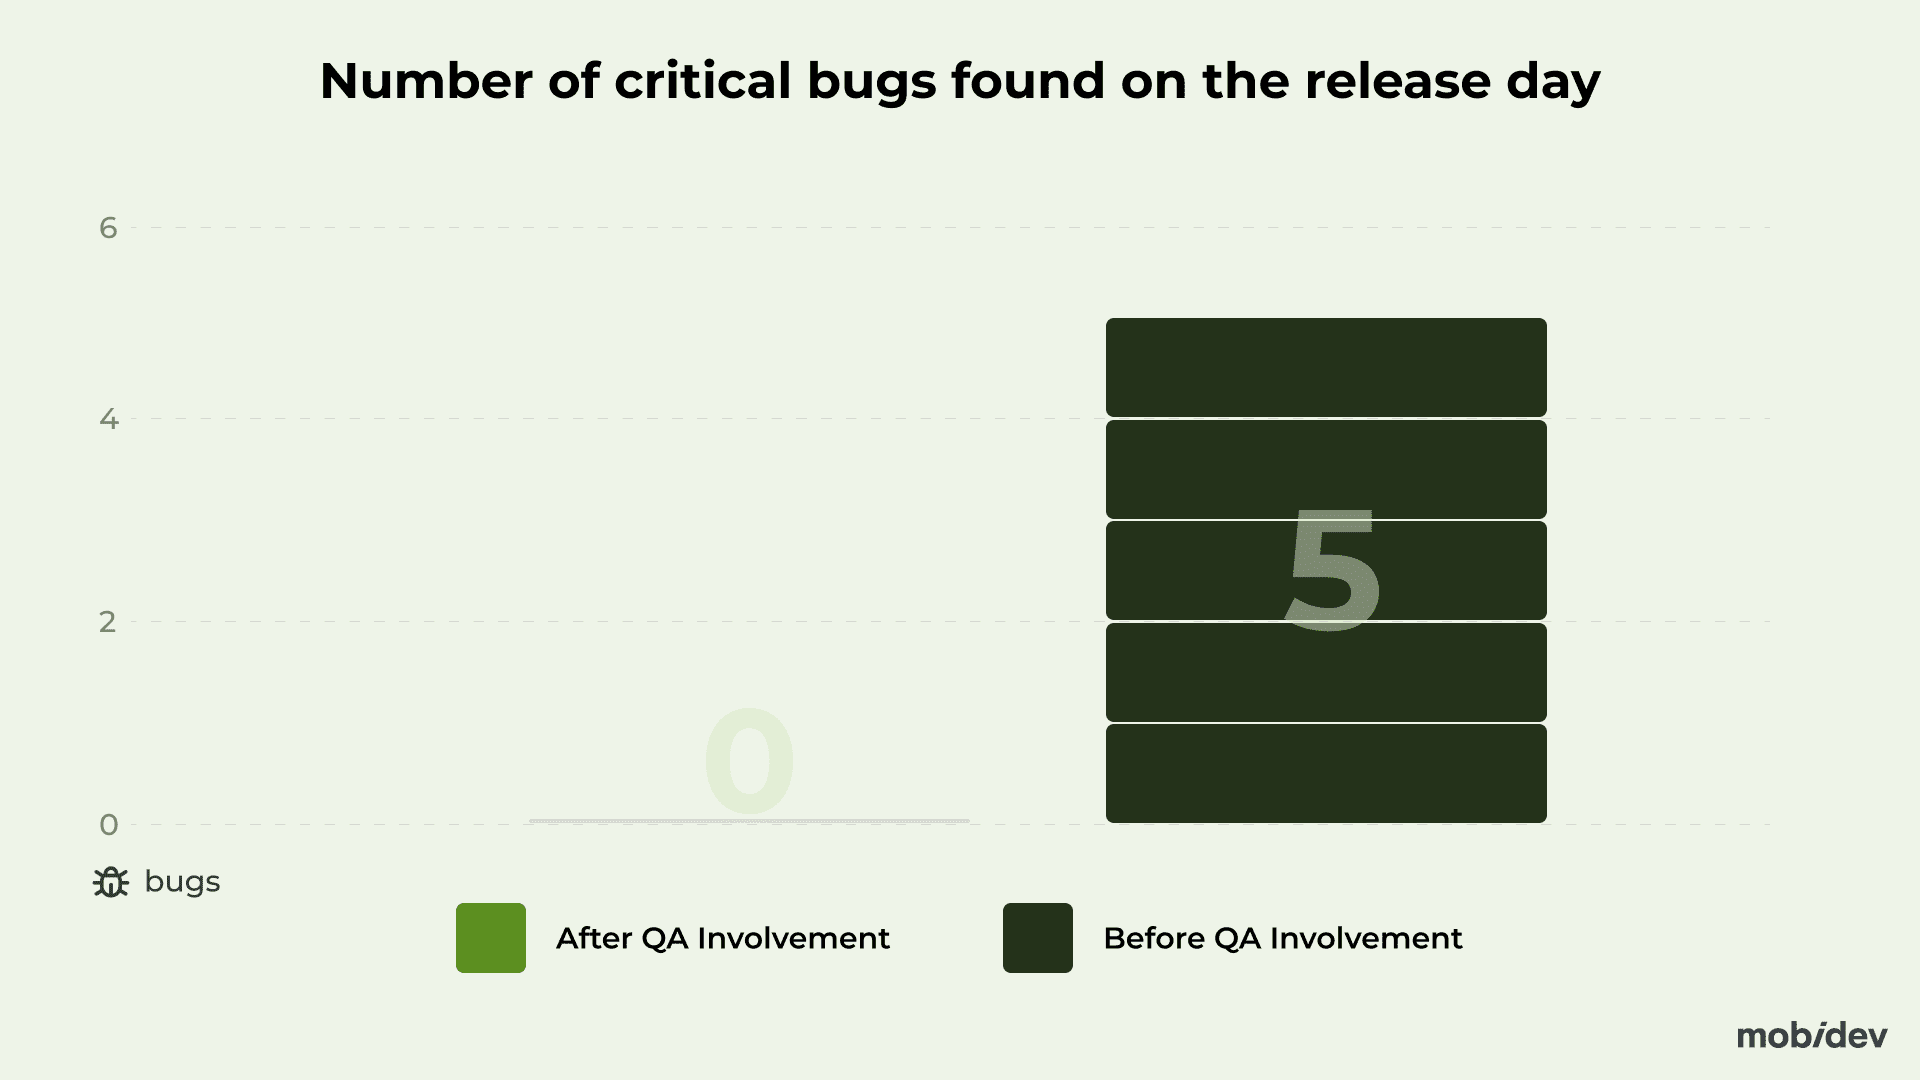 Critical bugs on release day before and after QA involvement